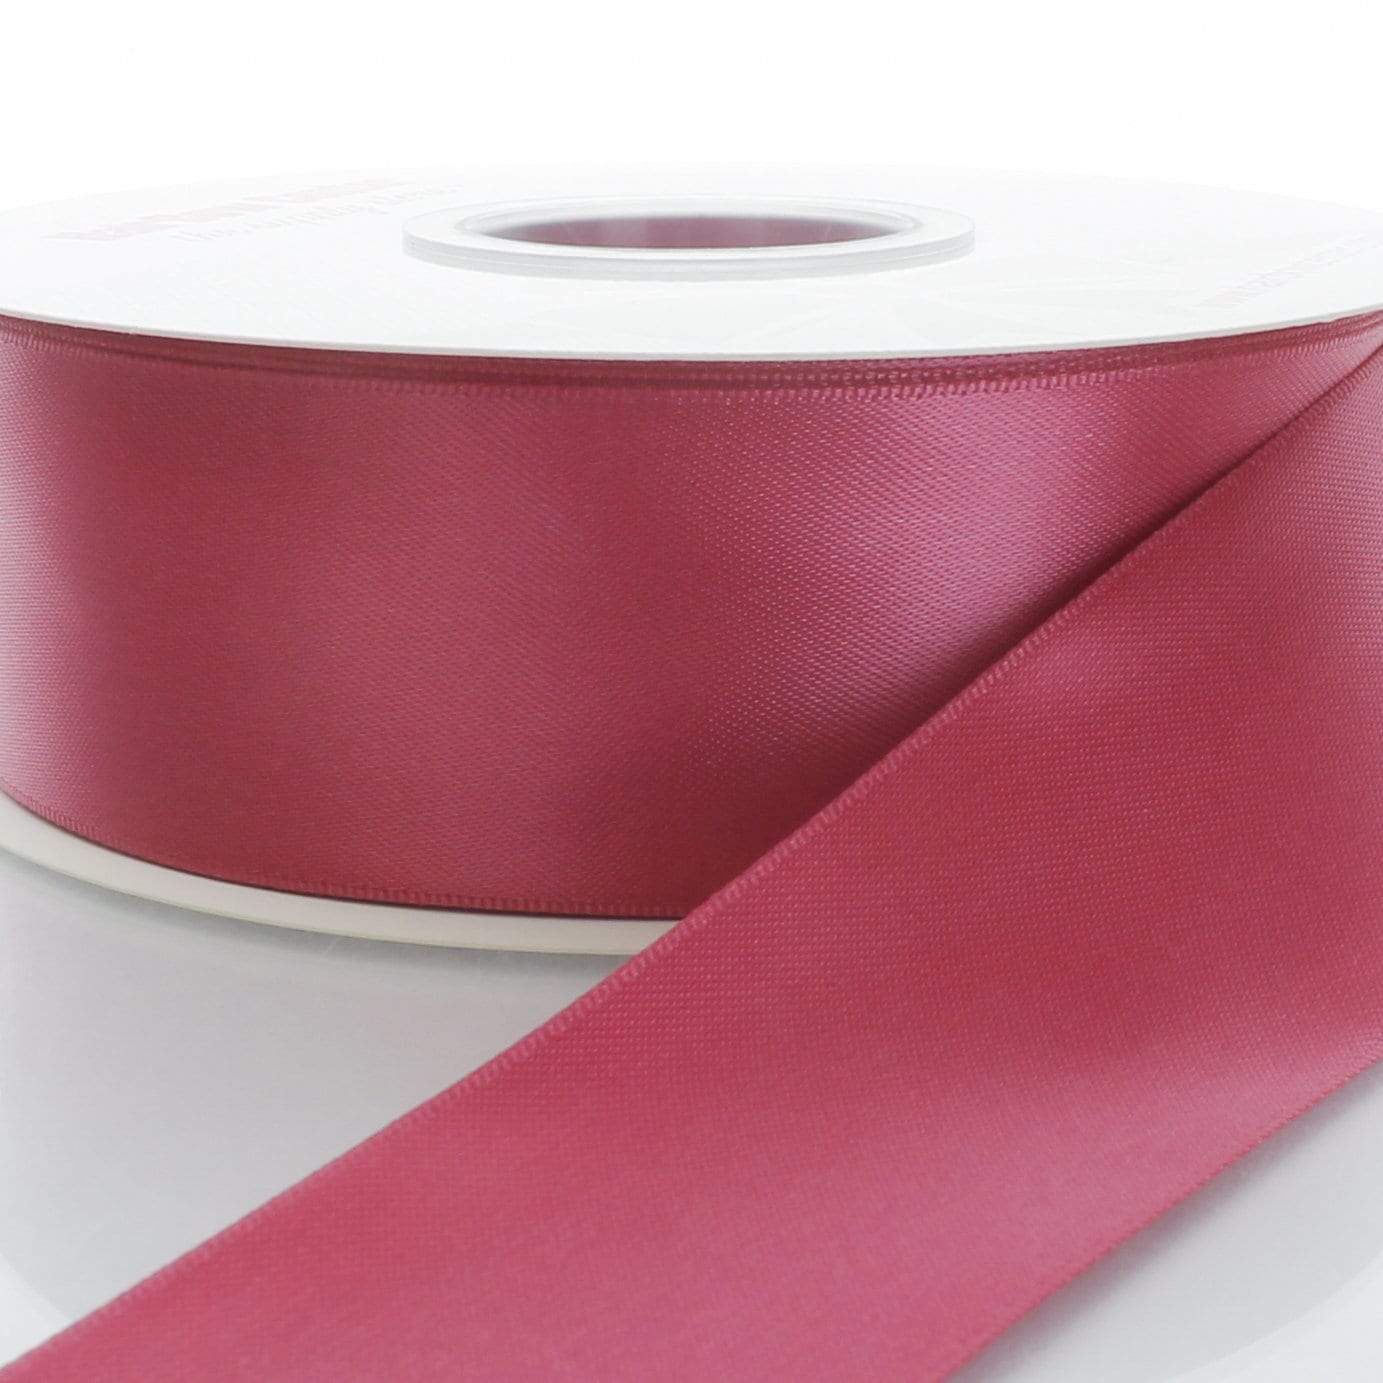  Dark Red Ribbon 1/4 Inches 36 Yards Satin Roll Perfect